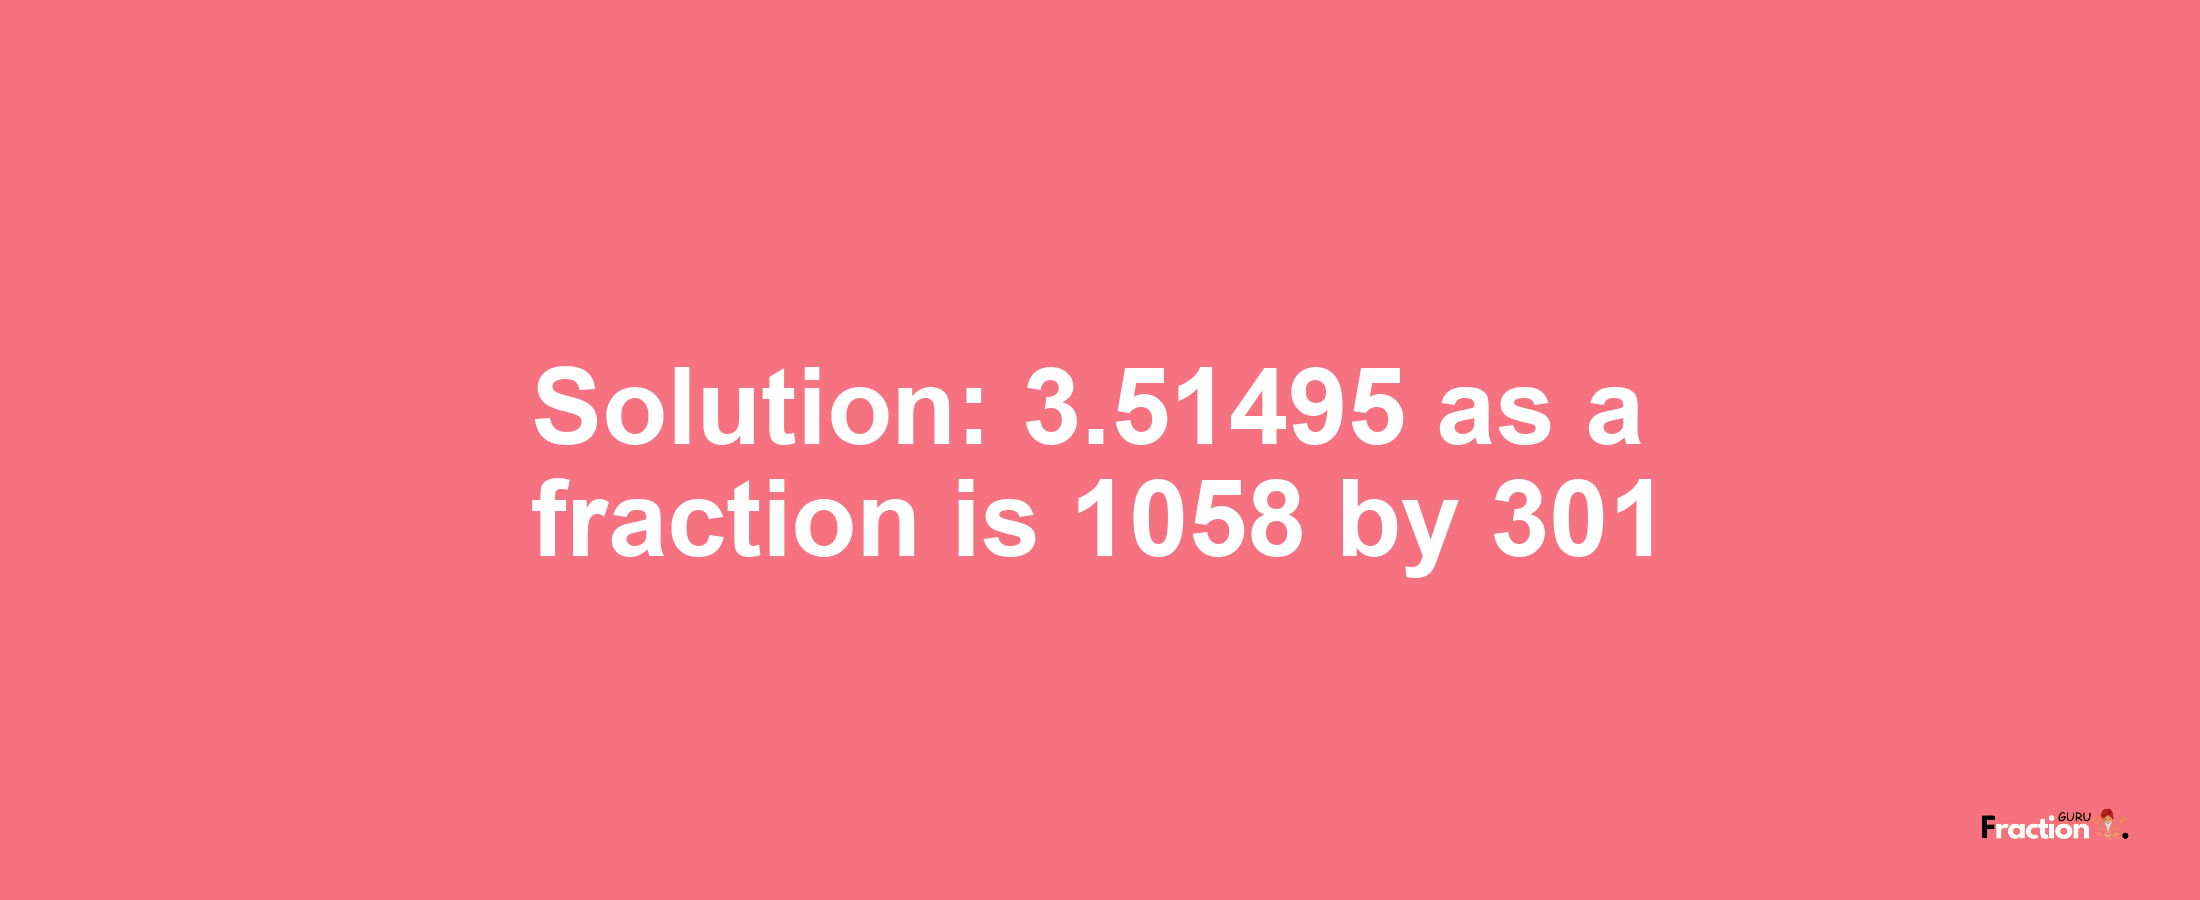 Solution:3.51495 as a fraction is 1058/301